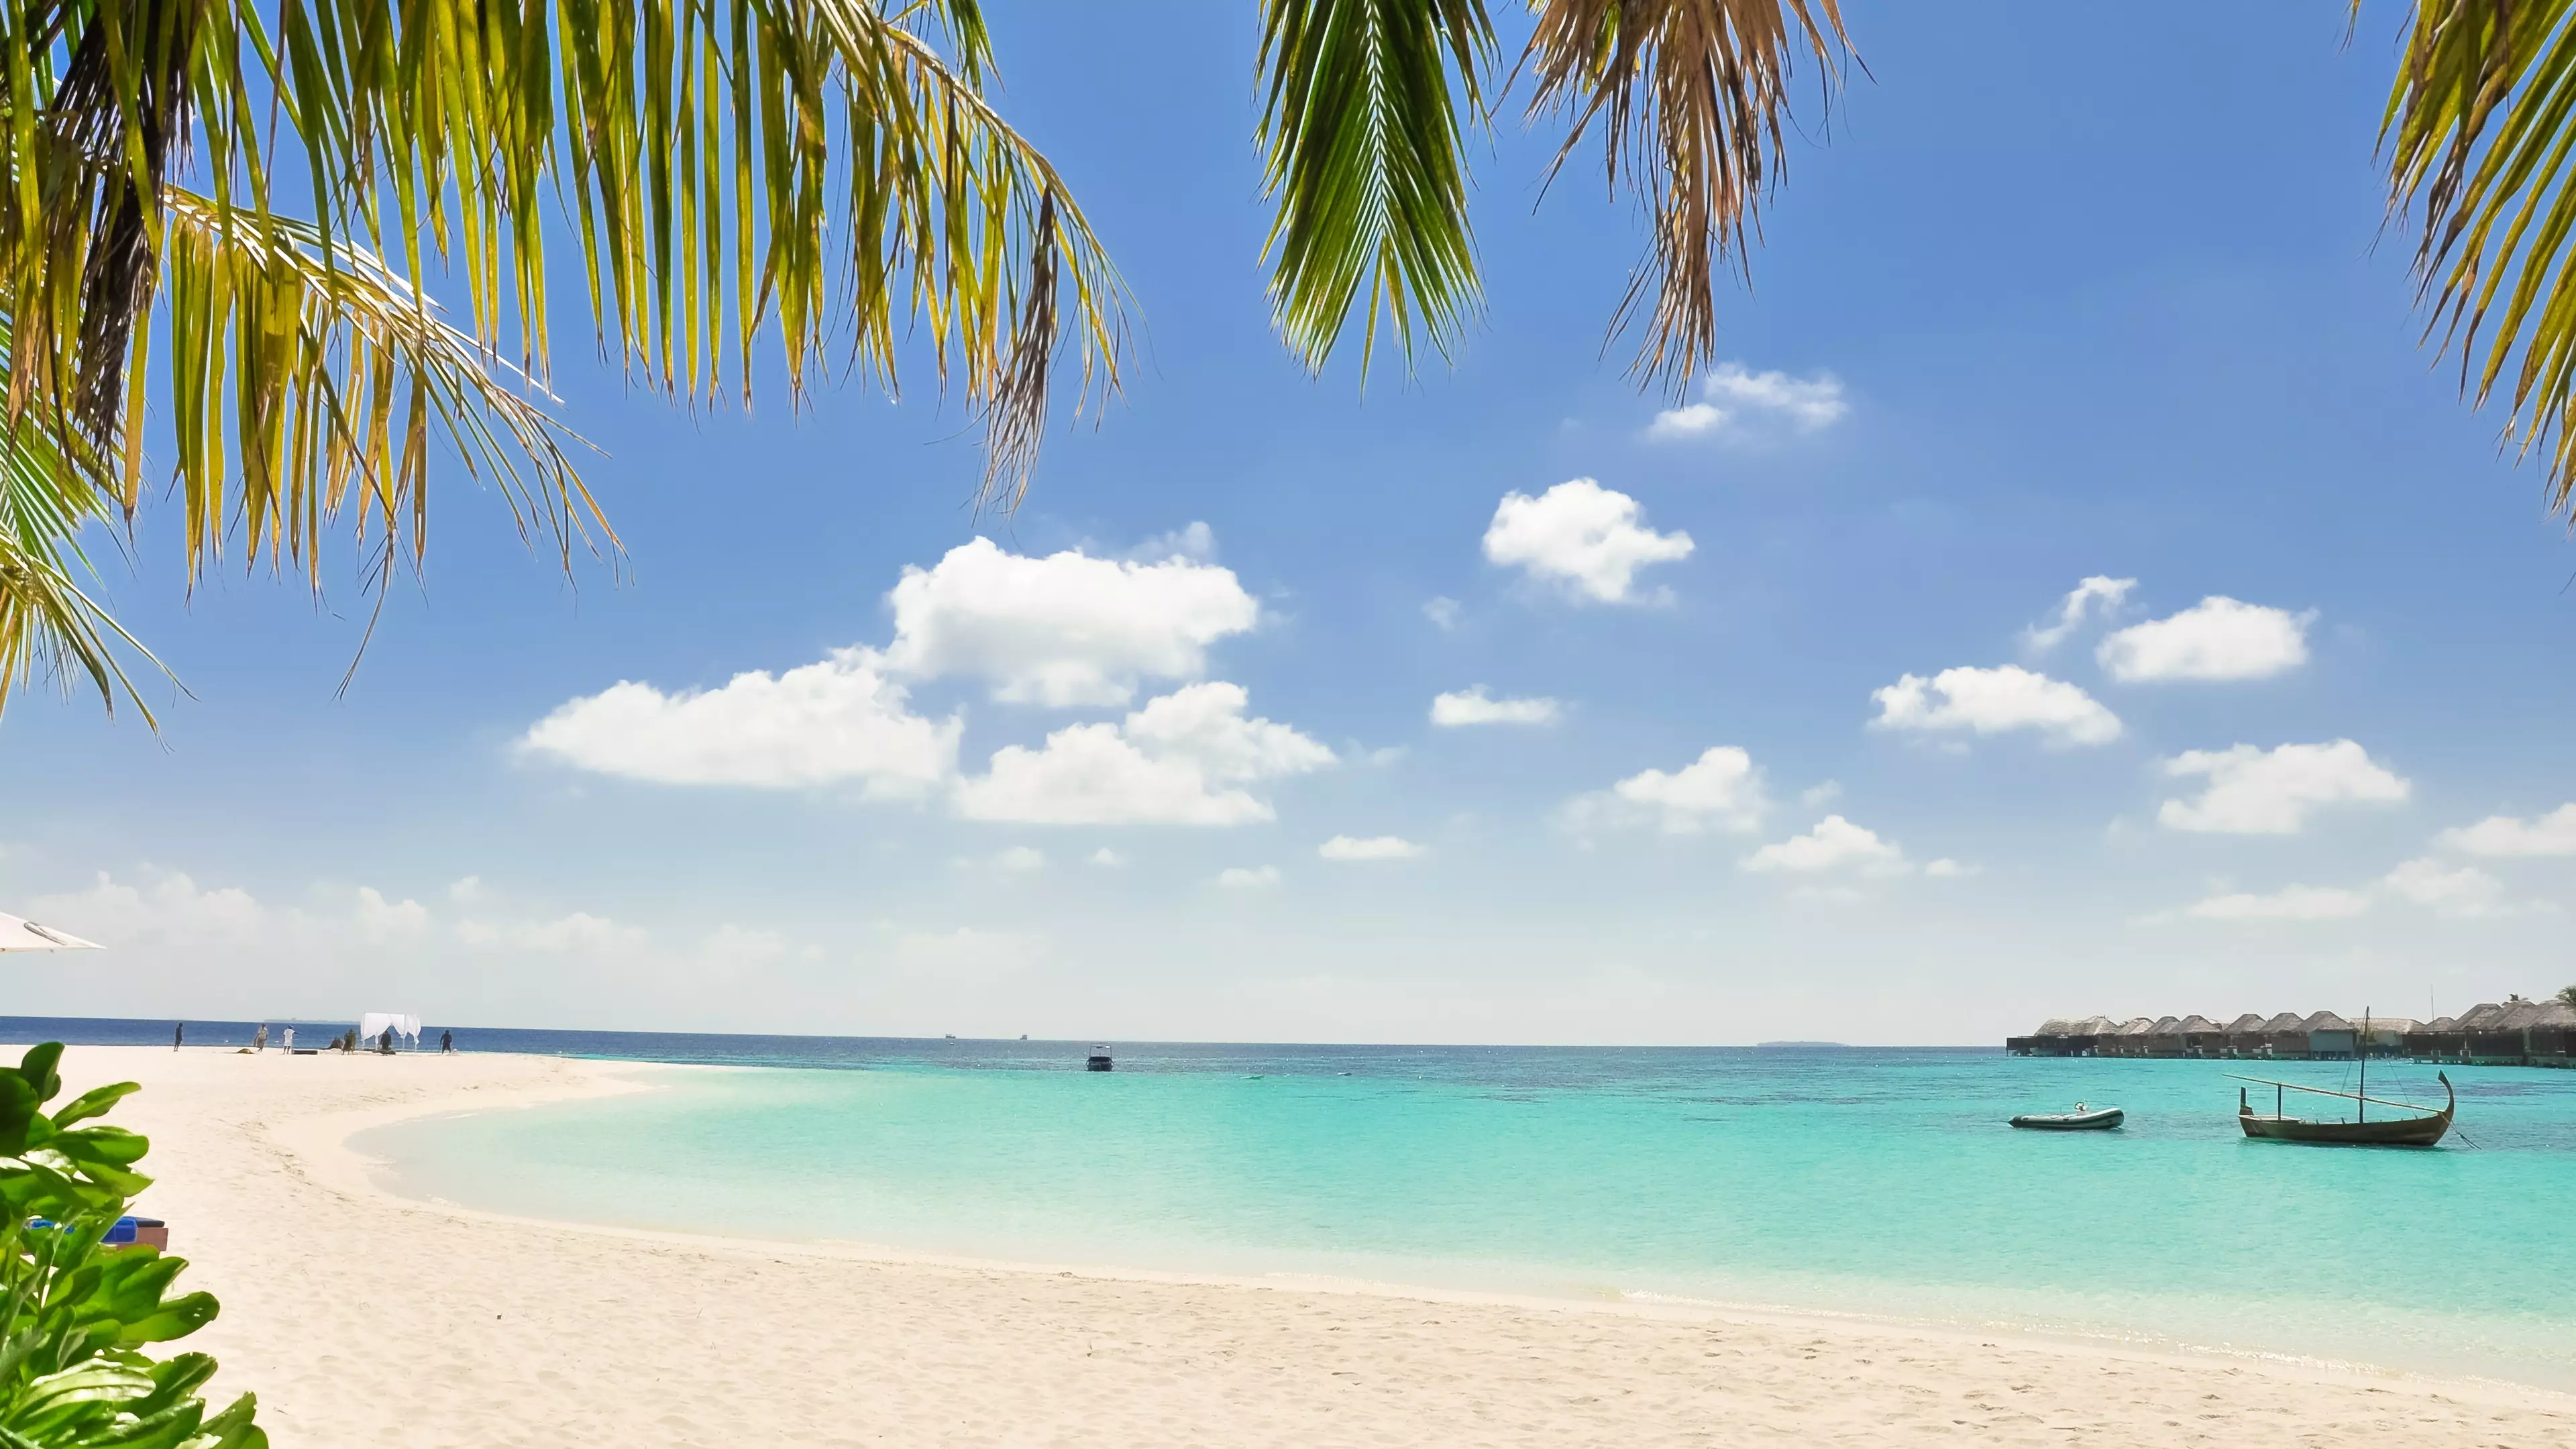 TUI Is Selling Return Flights From Stansted To Barbados For £199 